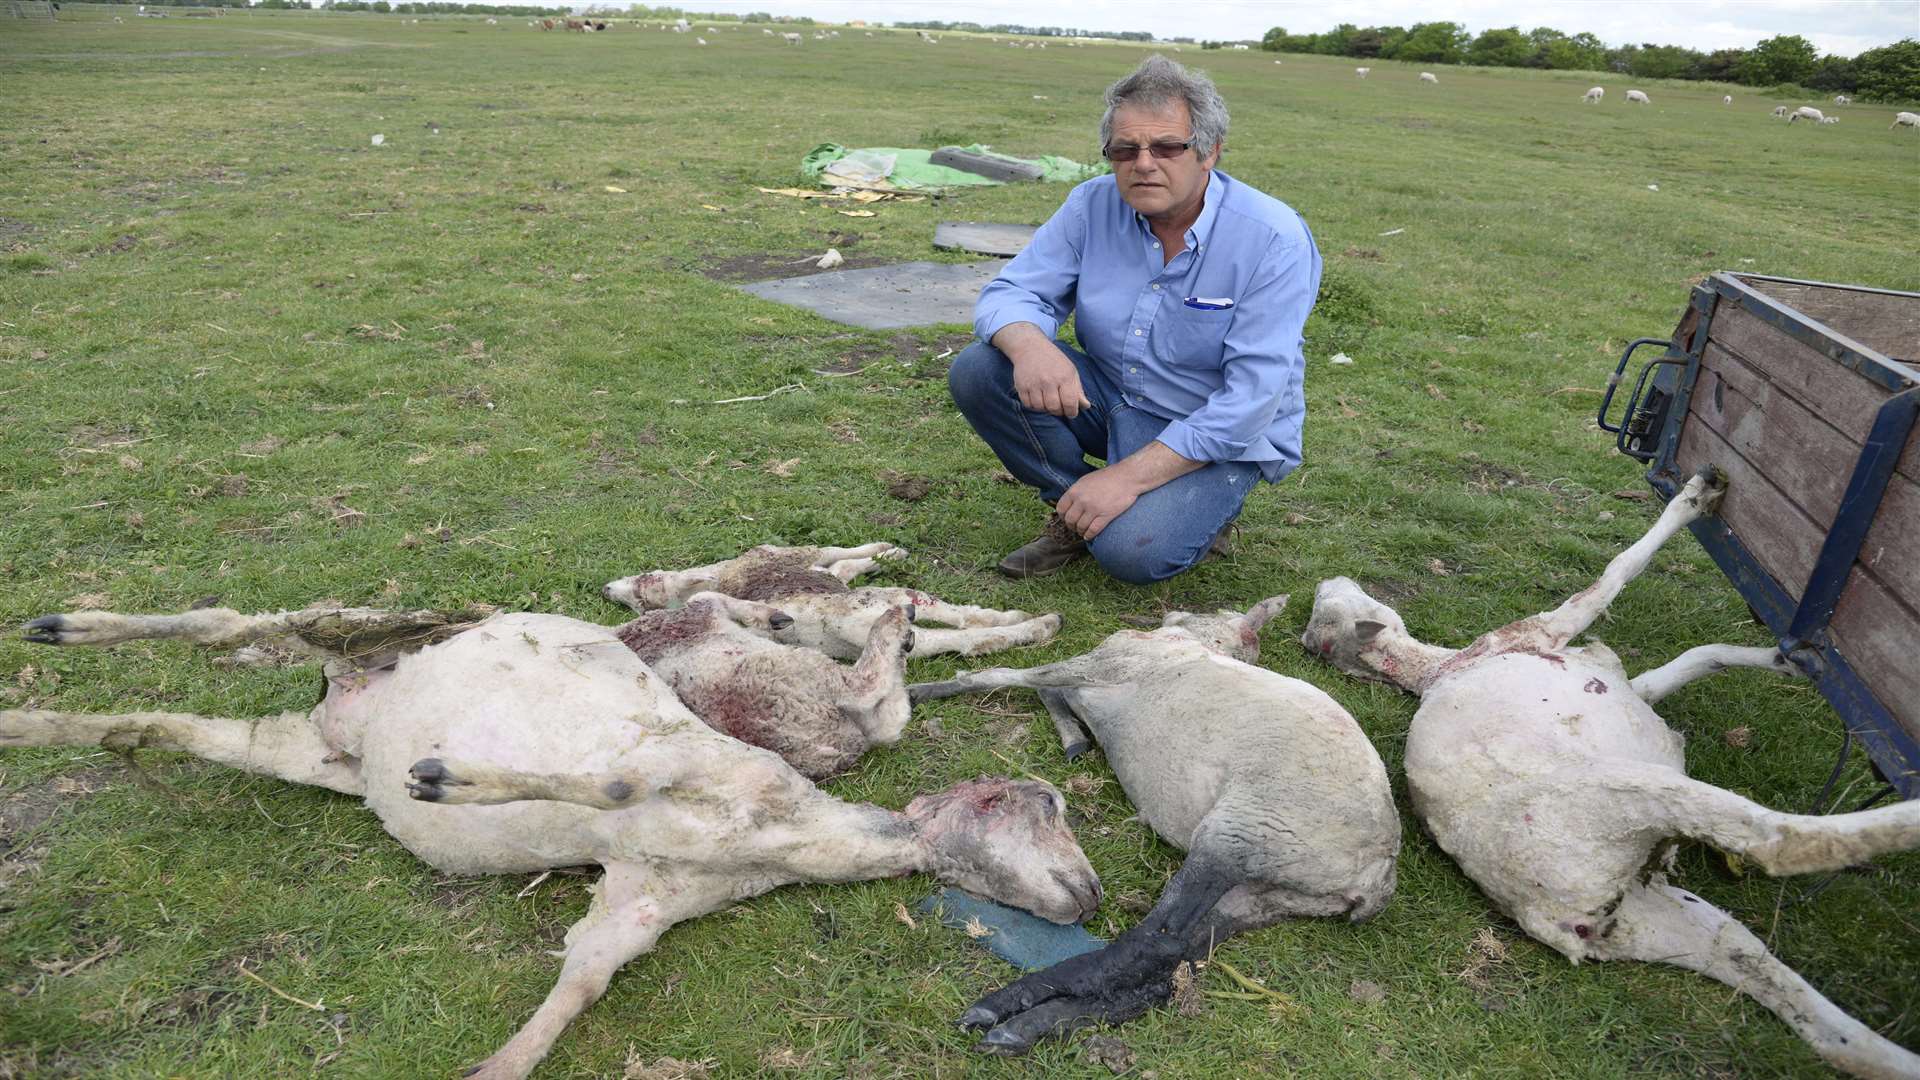 Farmer David Mosdell and some of the dead sheep found after being mauled by dogs at Danley Marshes Farm at Halfway